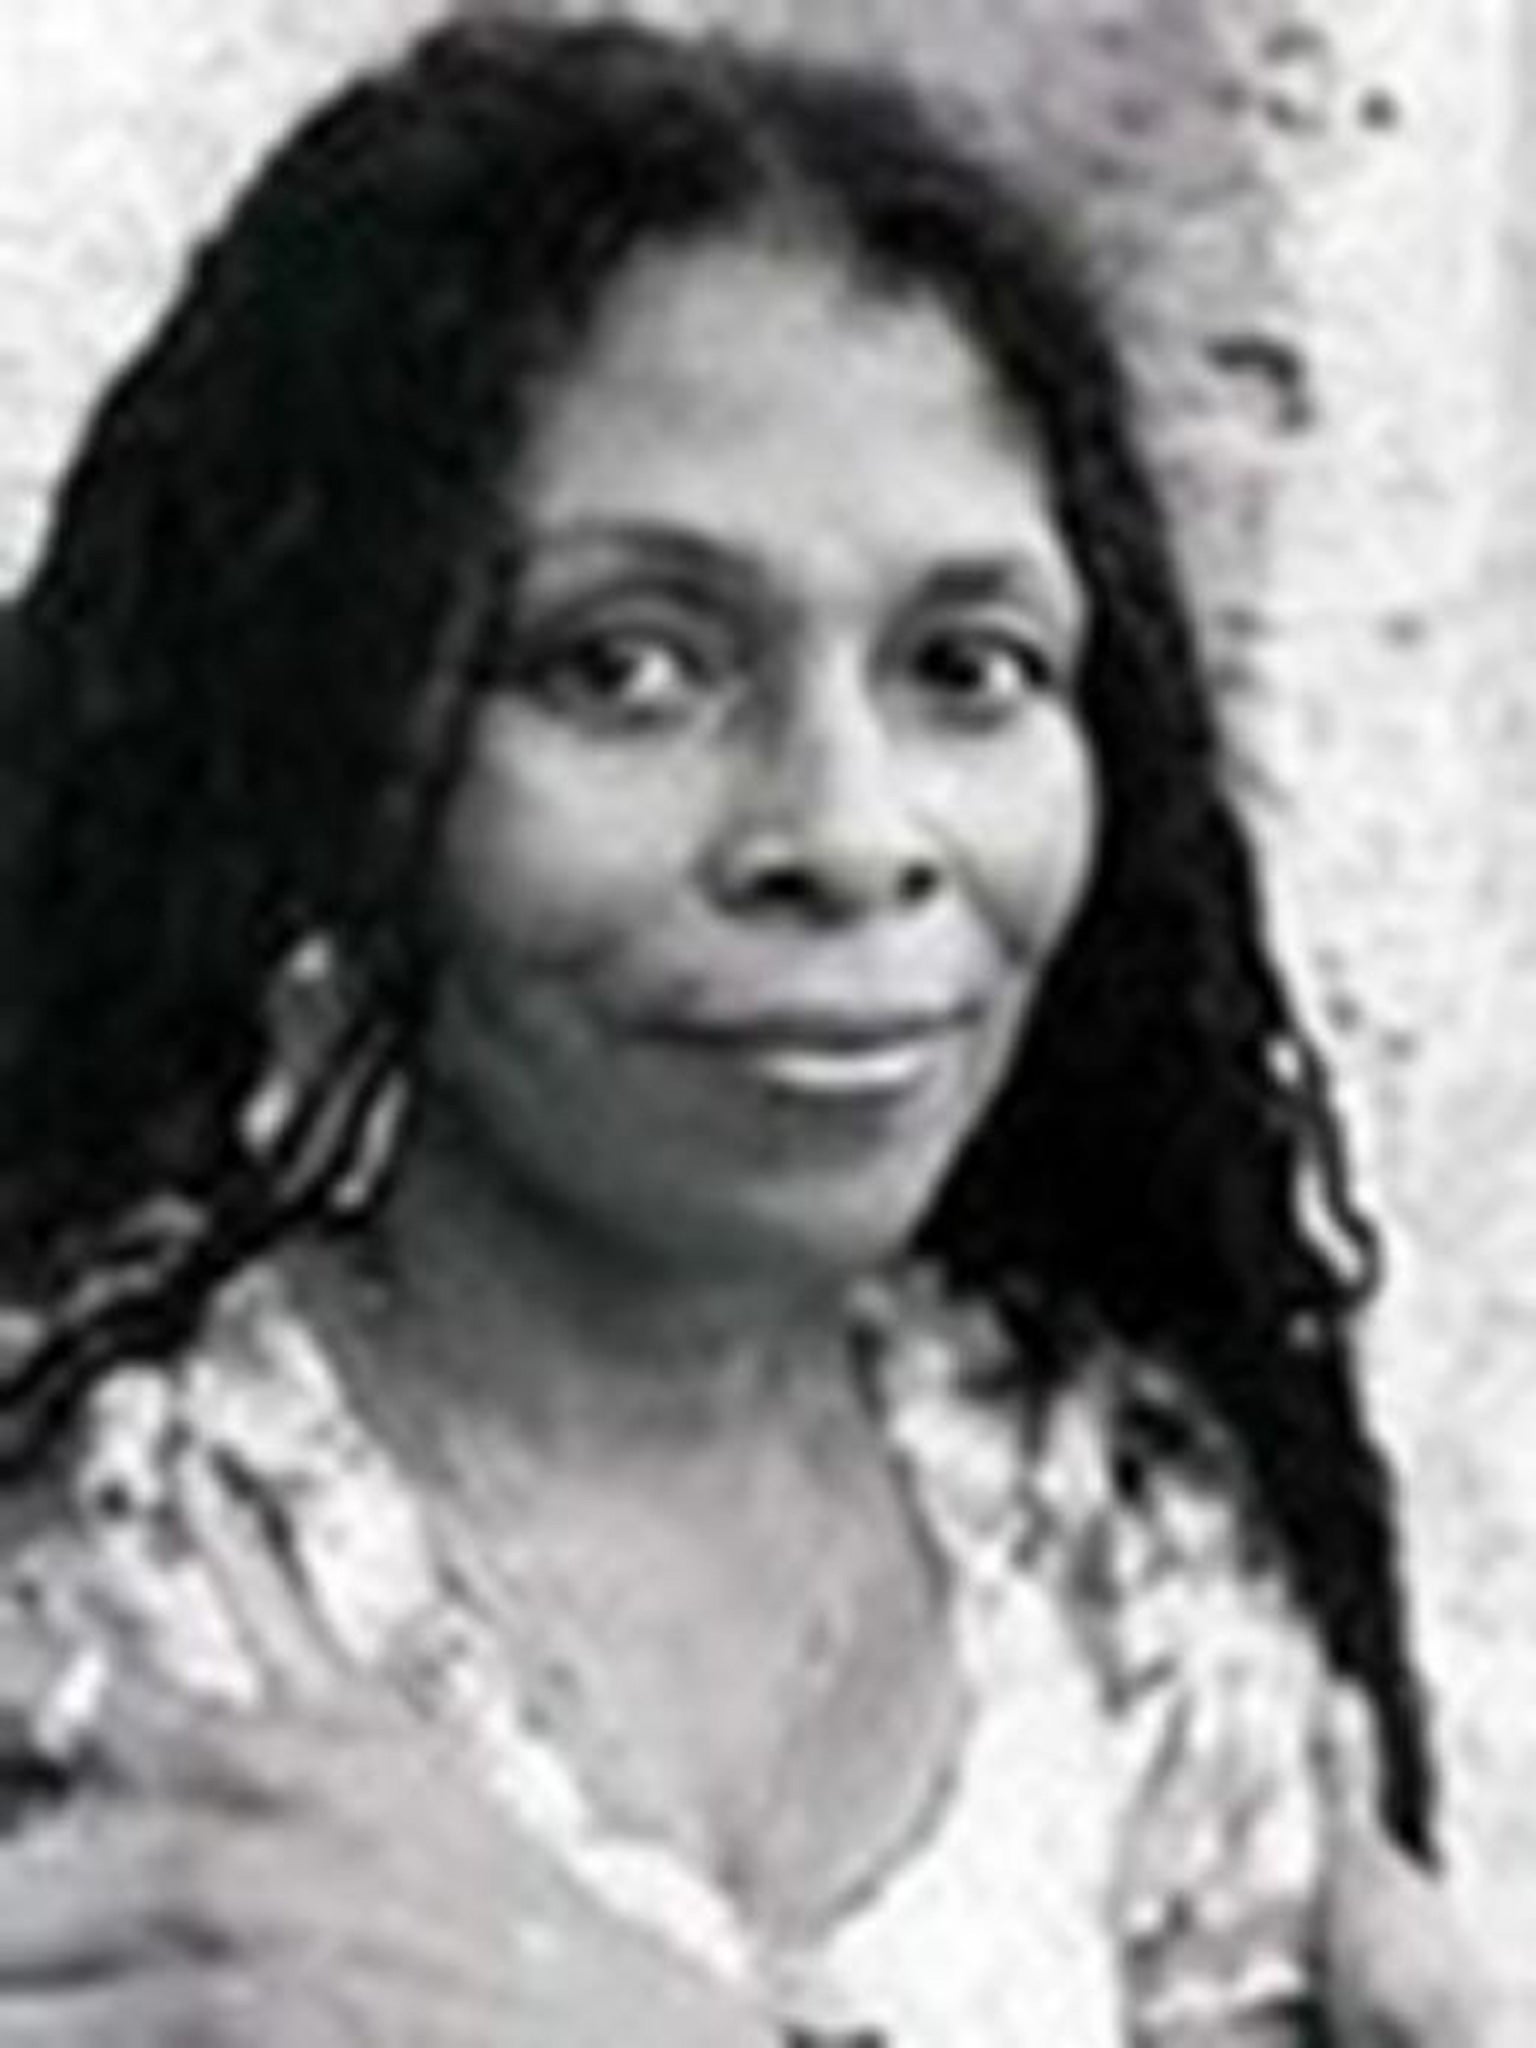 Assata Shakur, 67, a former member of the Black Panthers, escaped from jail and has been living in Cuba since 1984